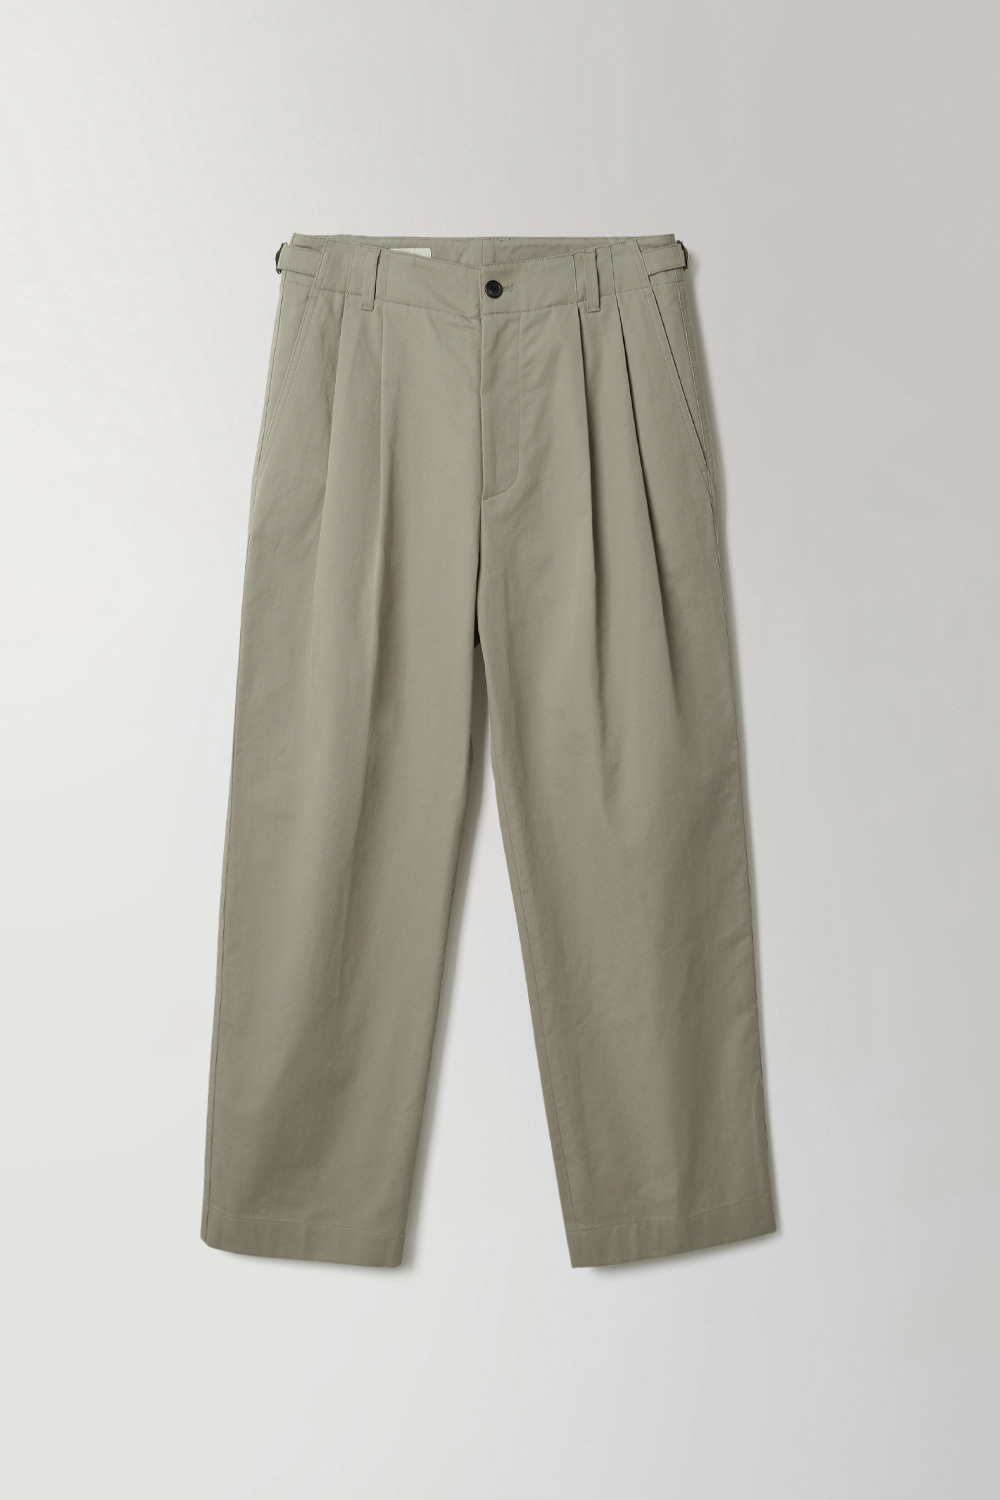 22AW TRAVELLER CHINO PANTS - OLIVE GREY